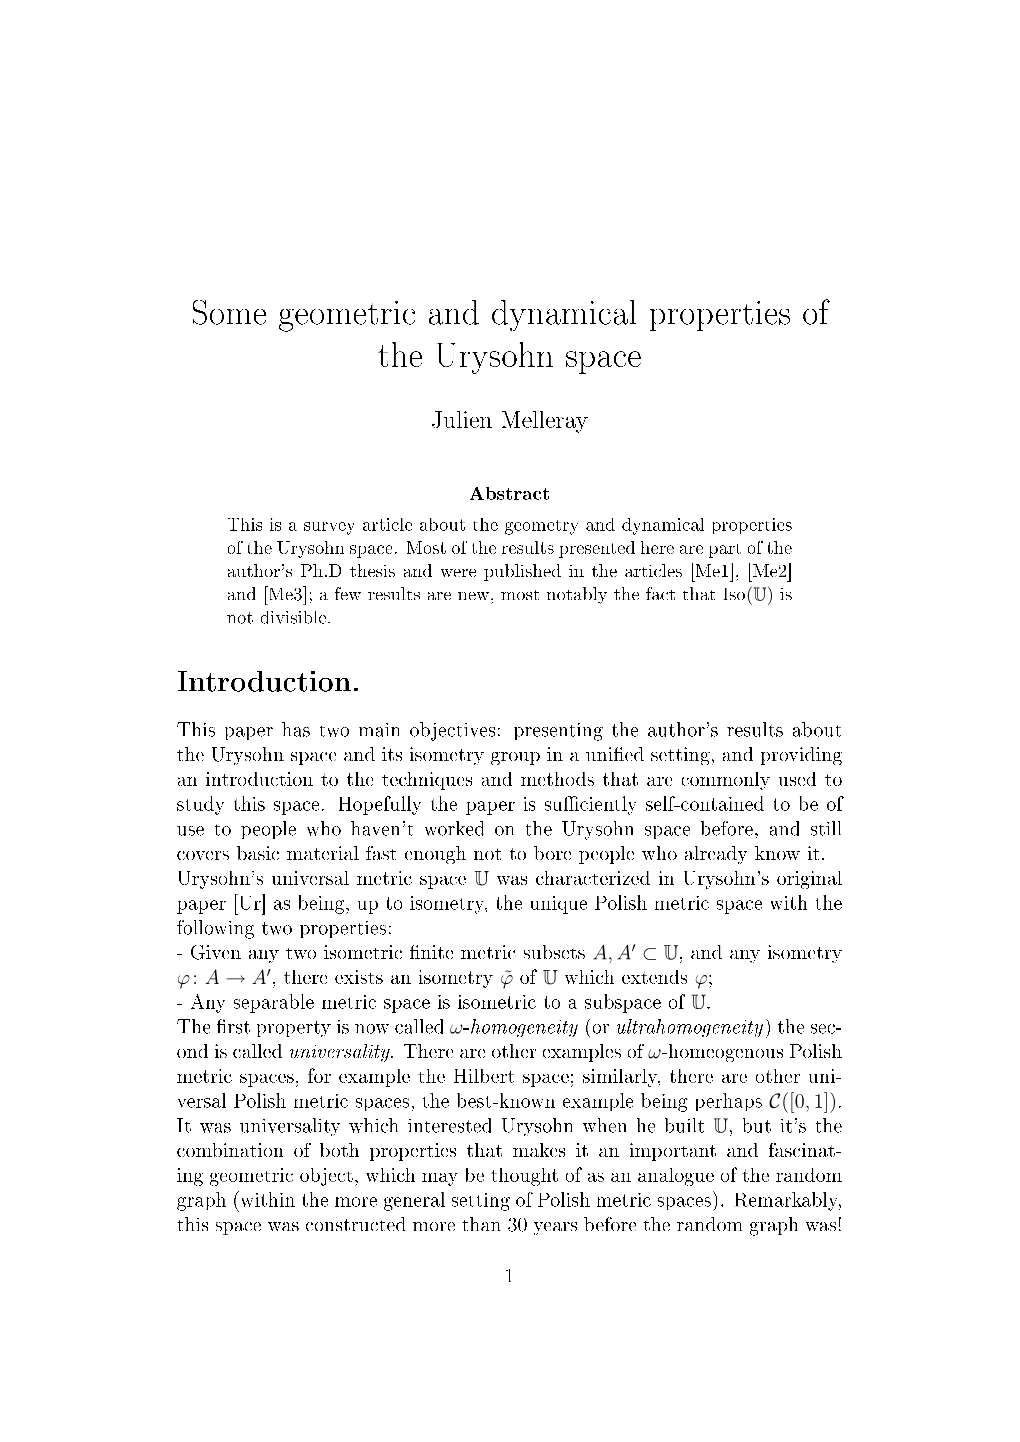 Some Geometric and Dynamical Properties of the Urysohn Space